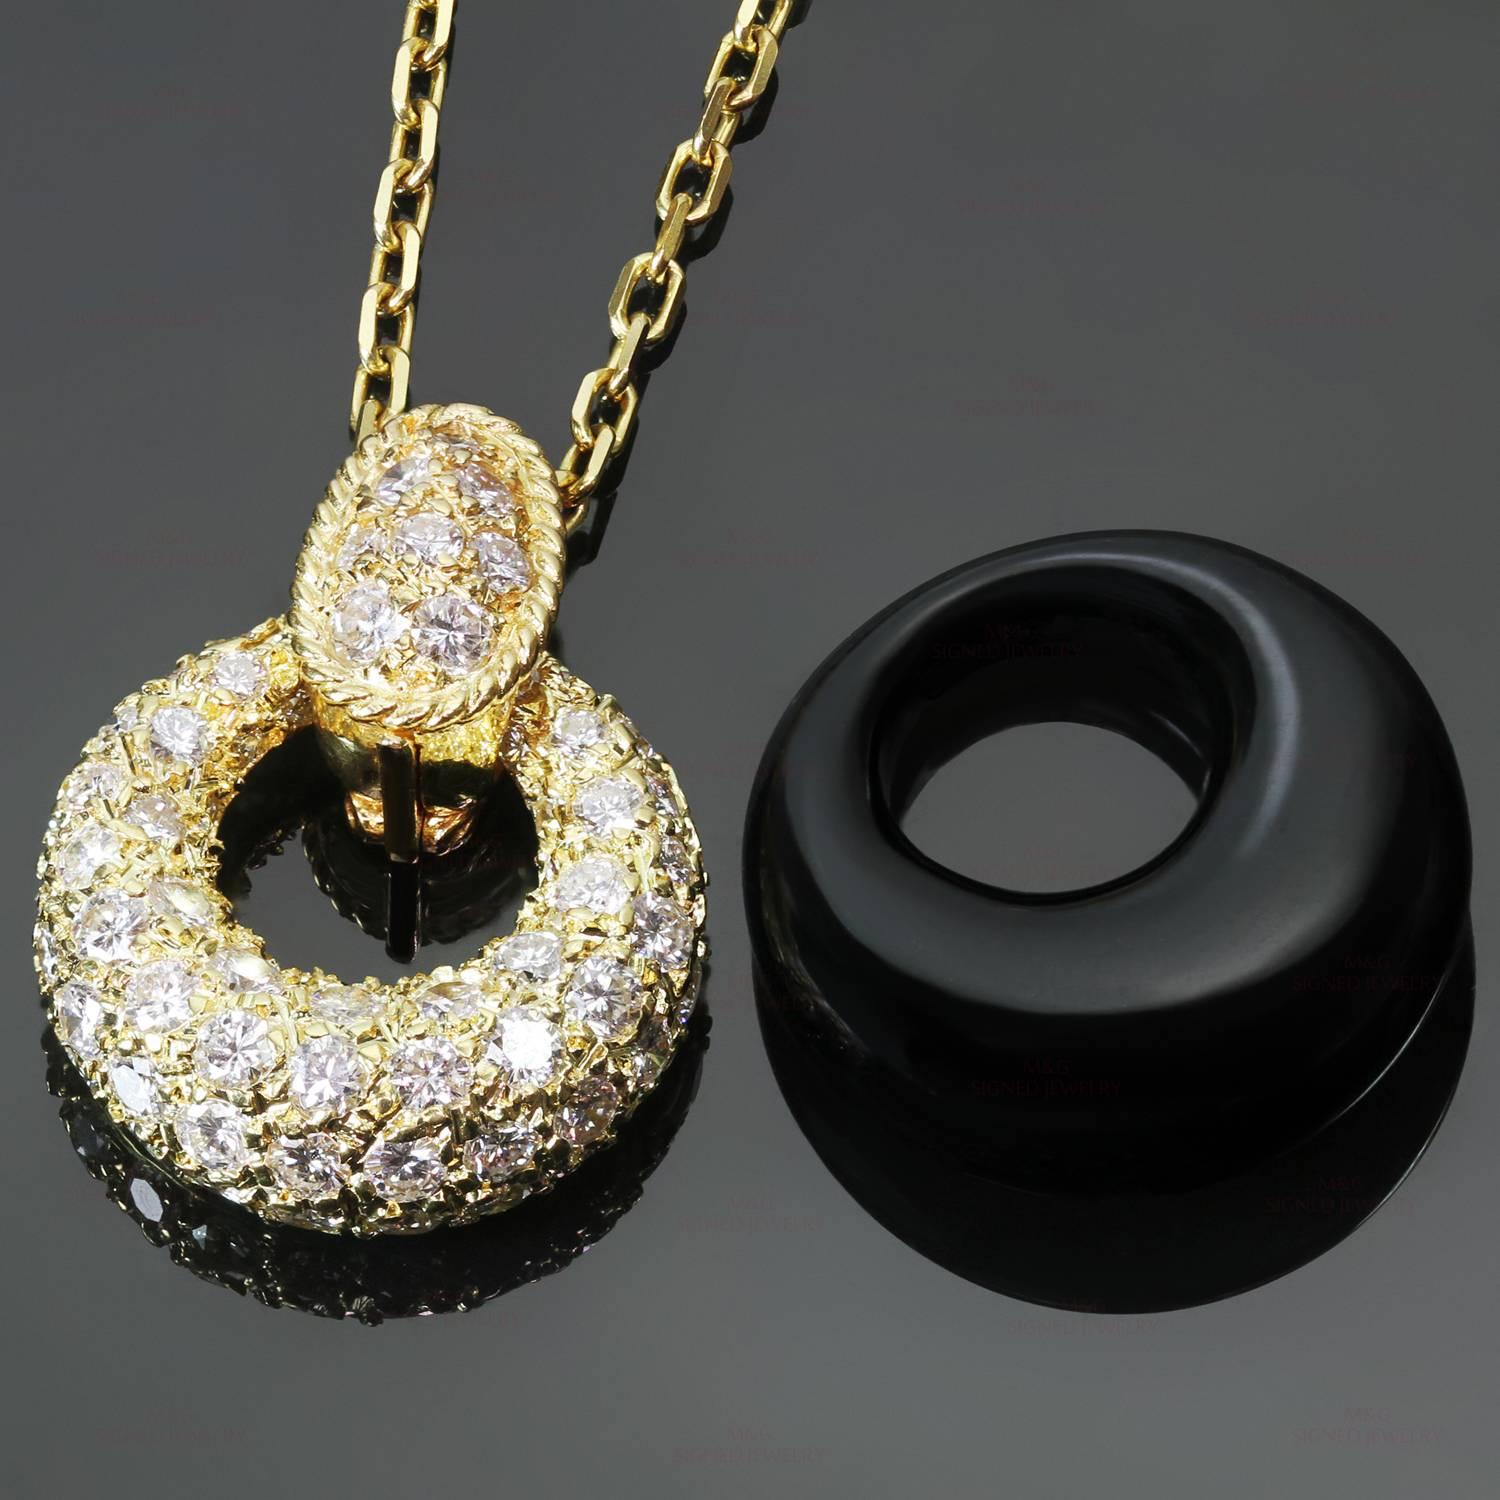 This classic circa 1970s Van Cleef & Arpels necklace is crafted in 18k yellow gold and features a versatile pendant enhancer completed with 2 circular pendants made of onyx and sparkling pave diamond gold. The enhancer and the pendant weight are set